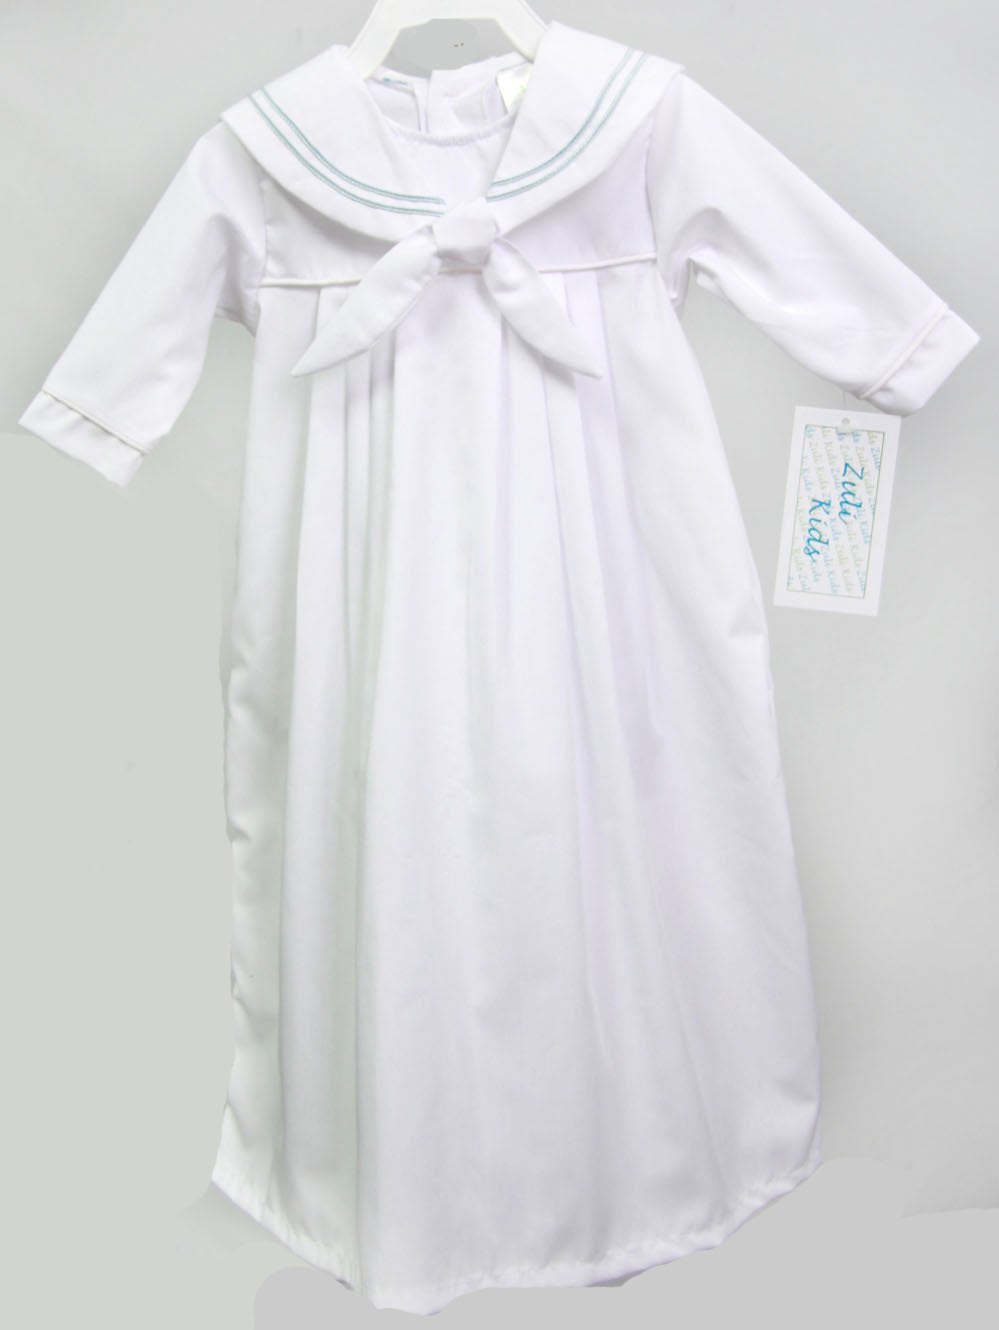 christening outfits for toddlers